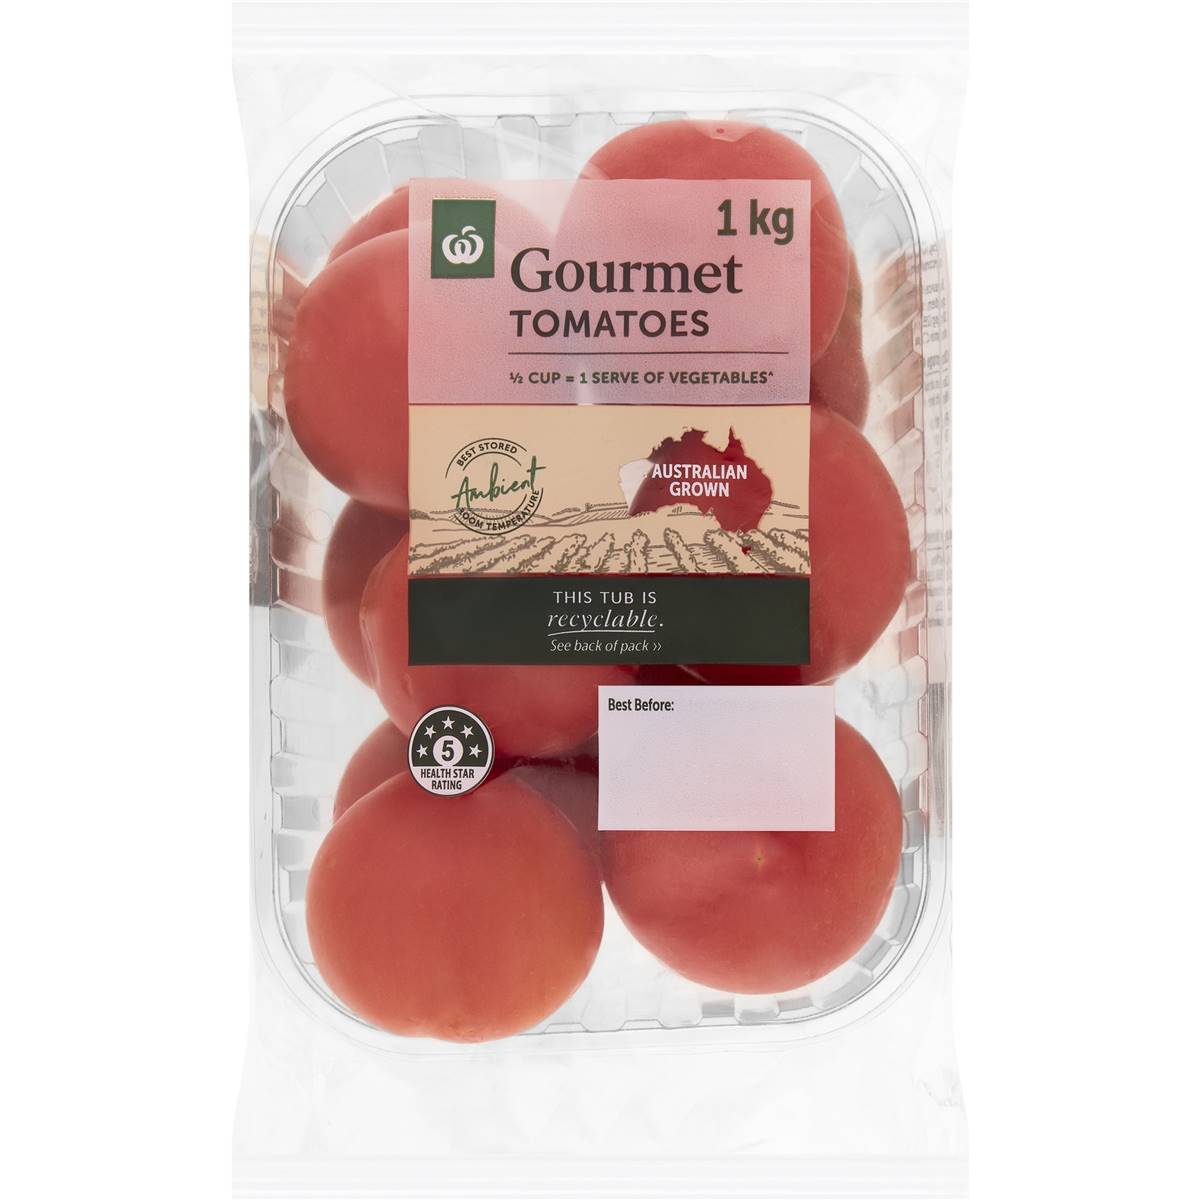 Calories in Woolworths Gourmet Tomatoes Punnet